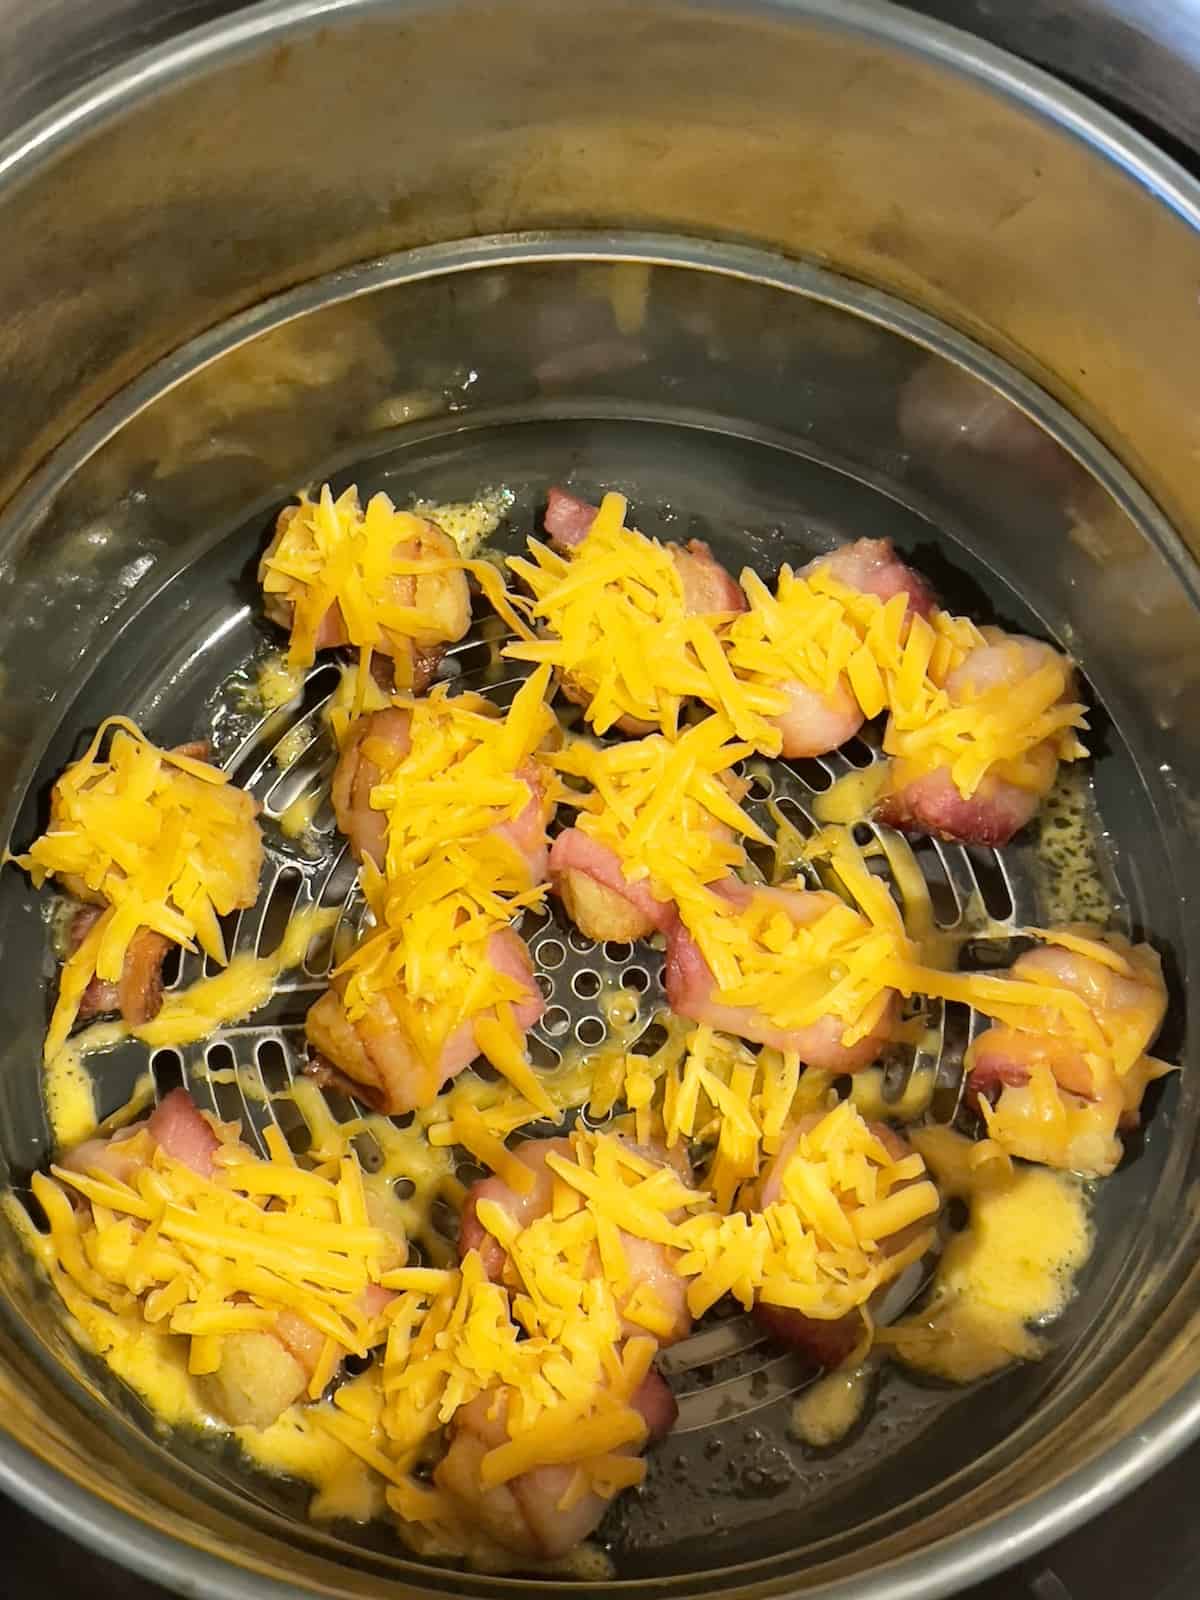 bacon wrapped tater tots in the air fryer topped with cheddar cheese